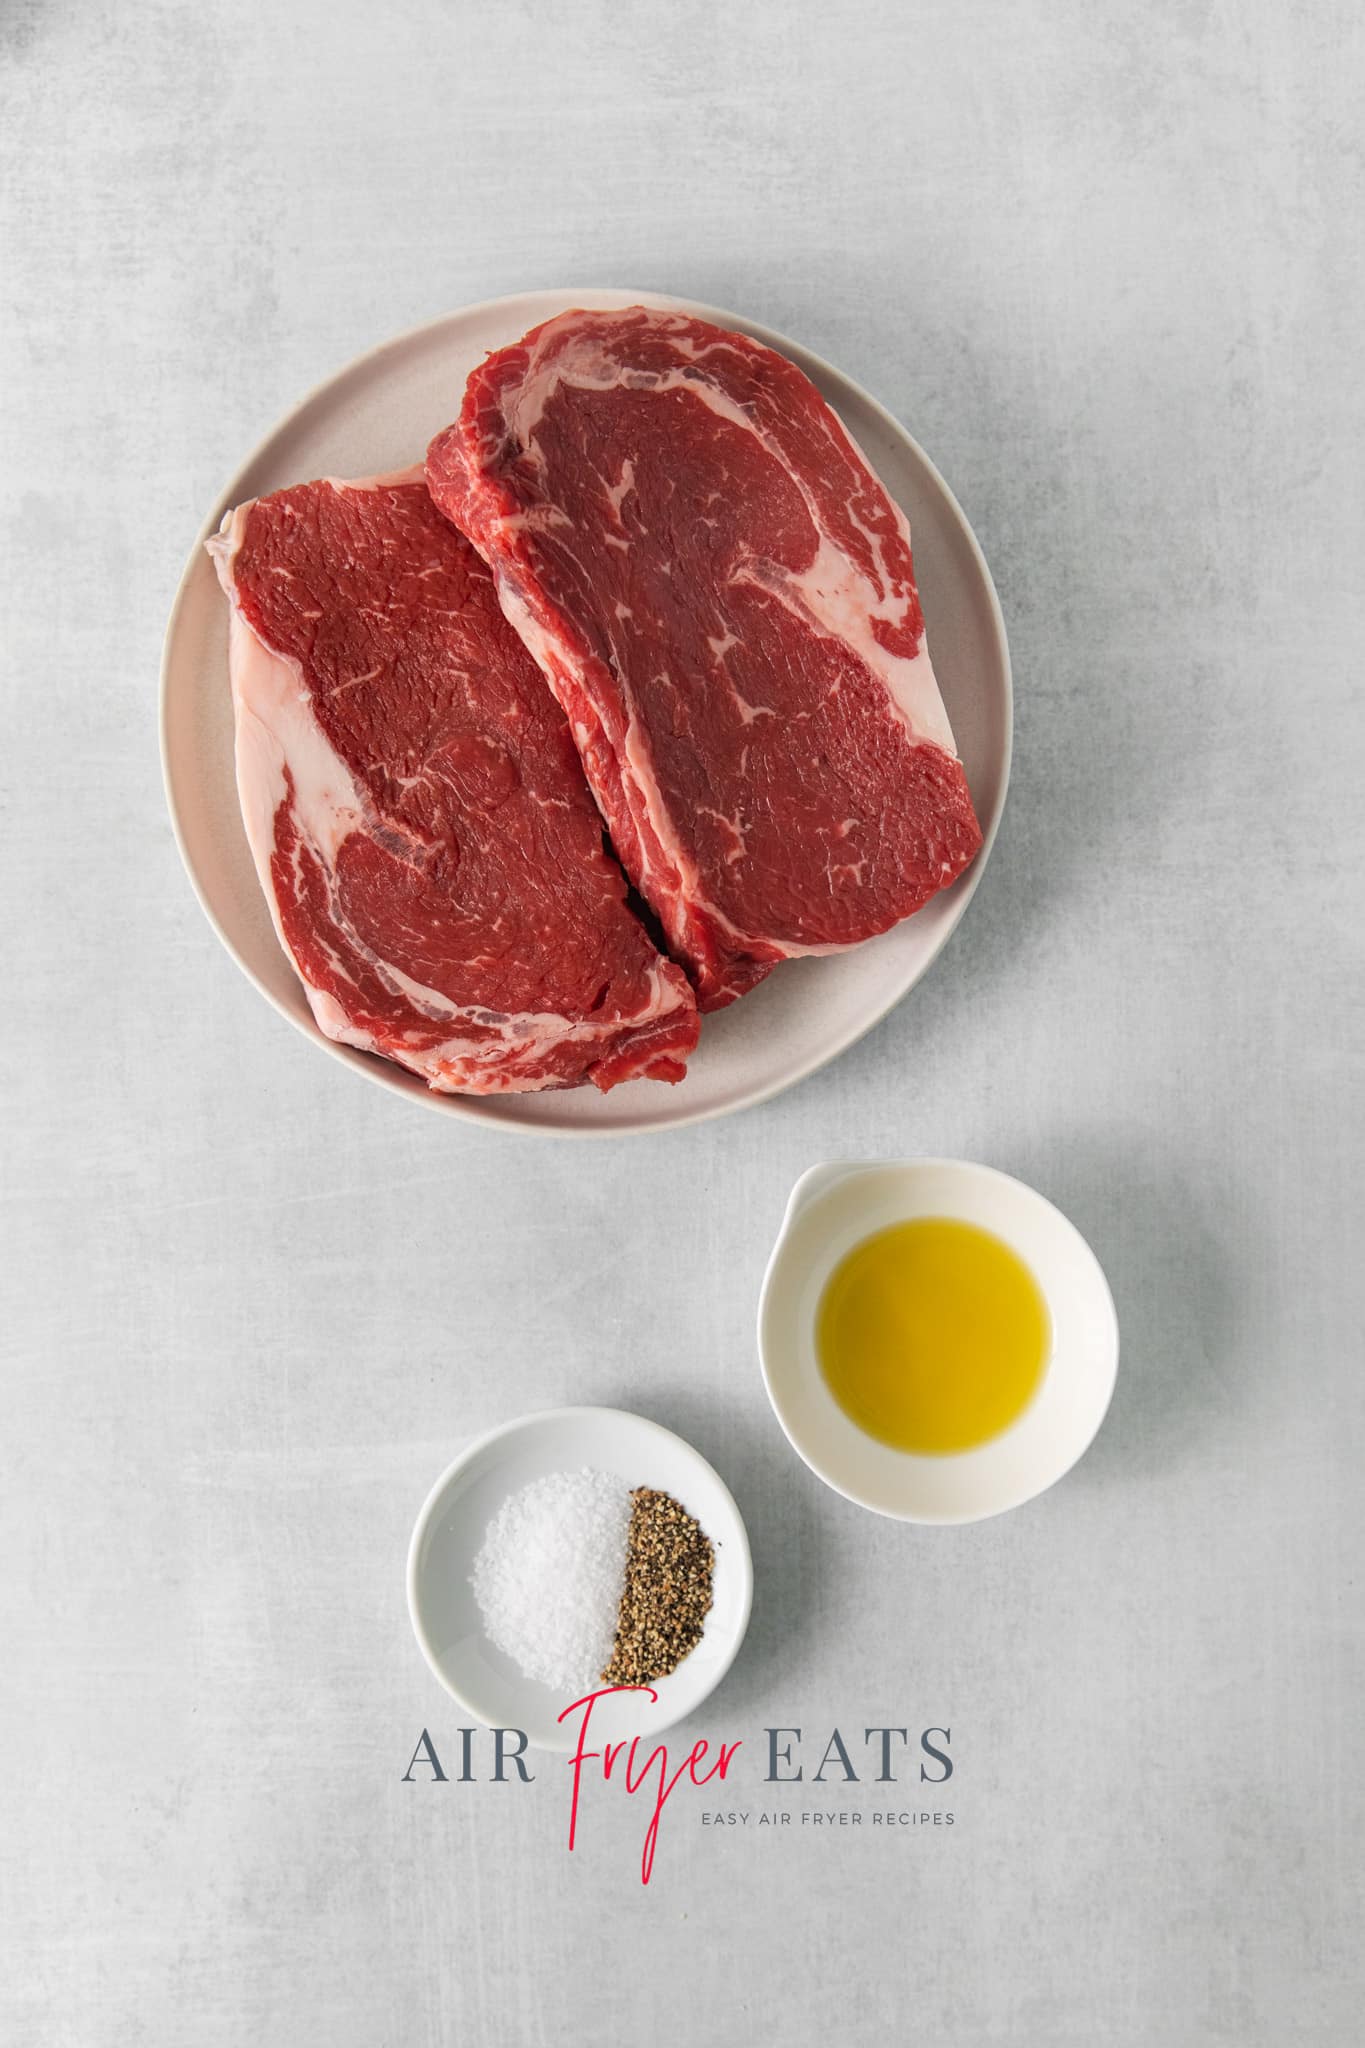 two ribeye steaks on a plate next a bowl of olive oil and another bowl of salt and pepper.